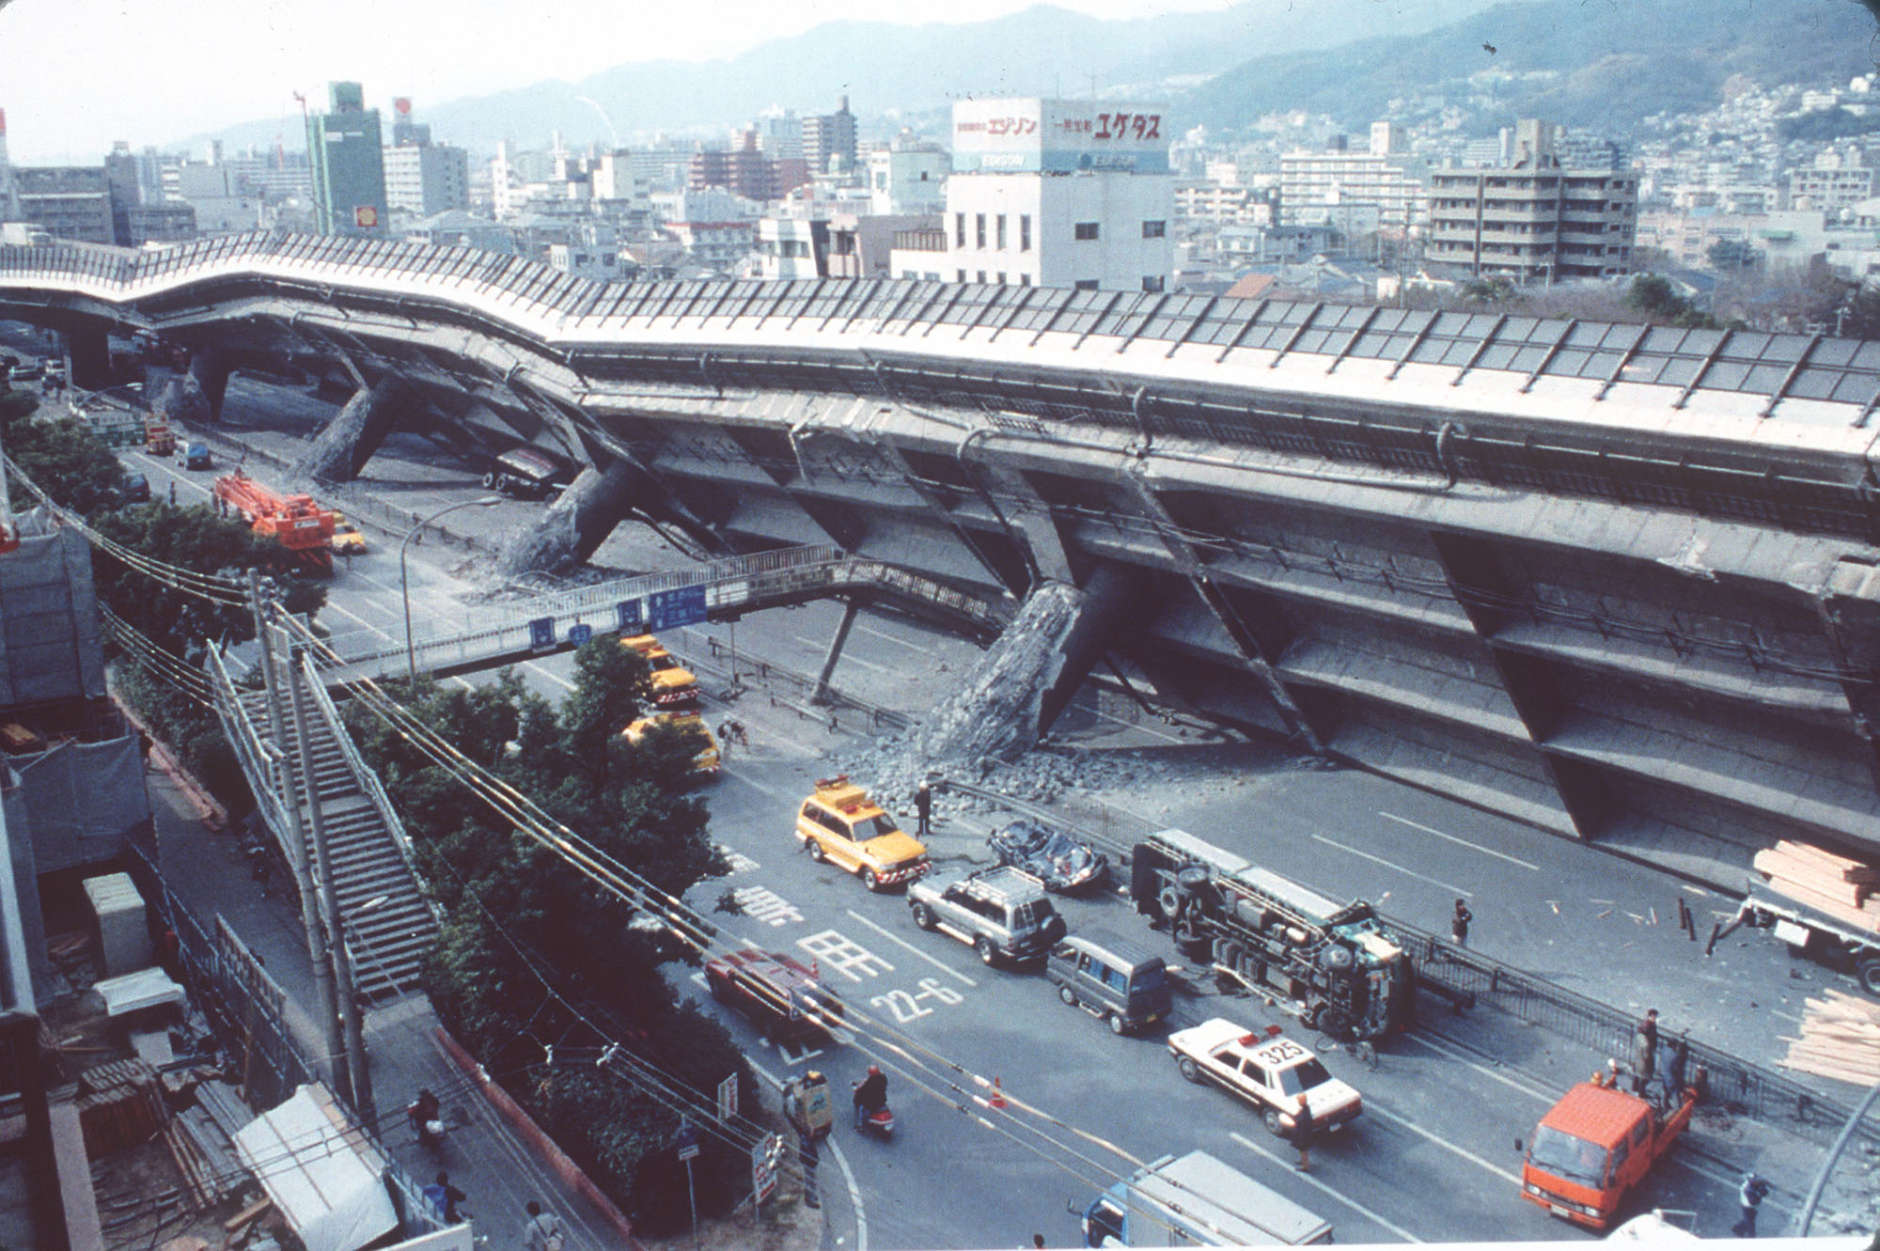 COLLAPSED HIGHWAY: Police and firemen survey the extensive damage to the collapsed Kobe-Osaka highway in Eastern Kobe, Wednesday, January 18, 1995. The elevated highway collapsed when a major 7.2 magnitude earthquake hit this Western Japan port city Tuesday morning. More than 4,000 were killed in the disaster. (AP-Photo/stf/Atsushi Tsukada/-01/18/1995-)